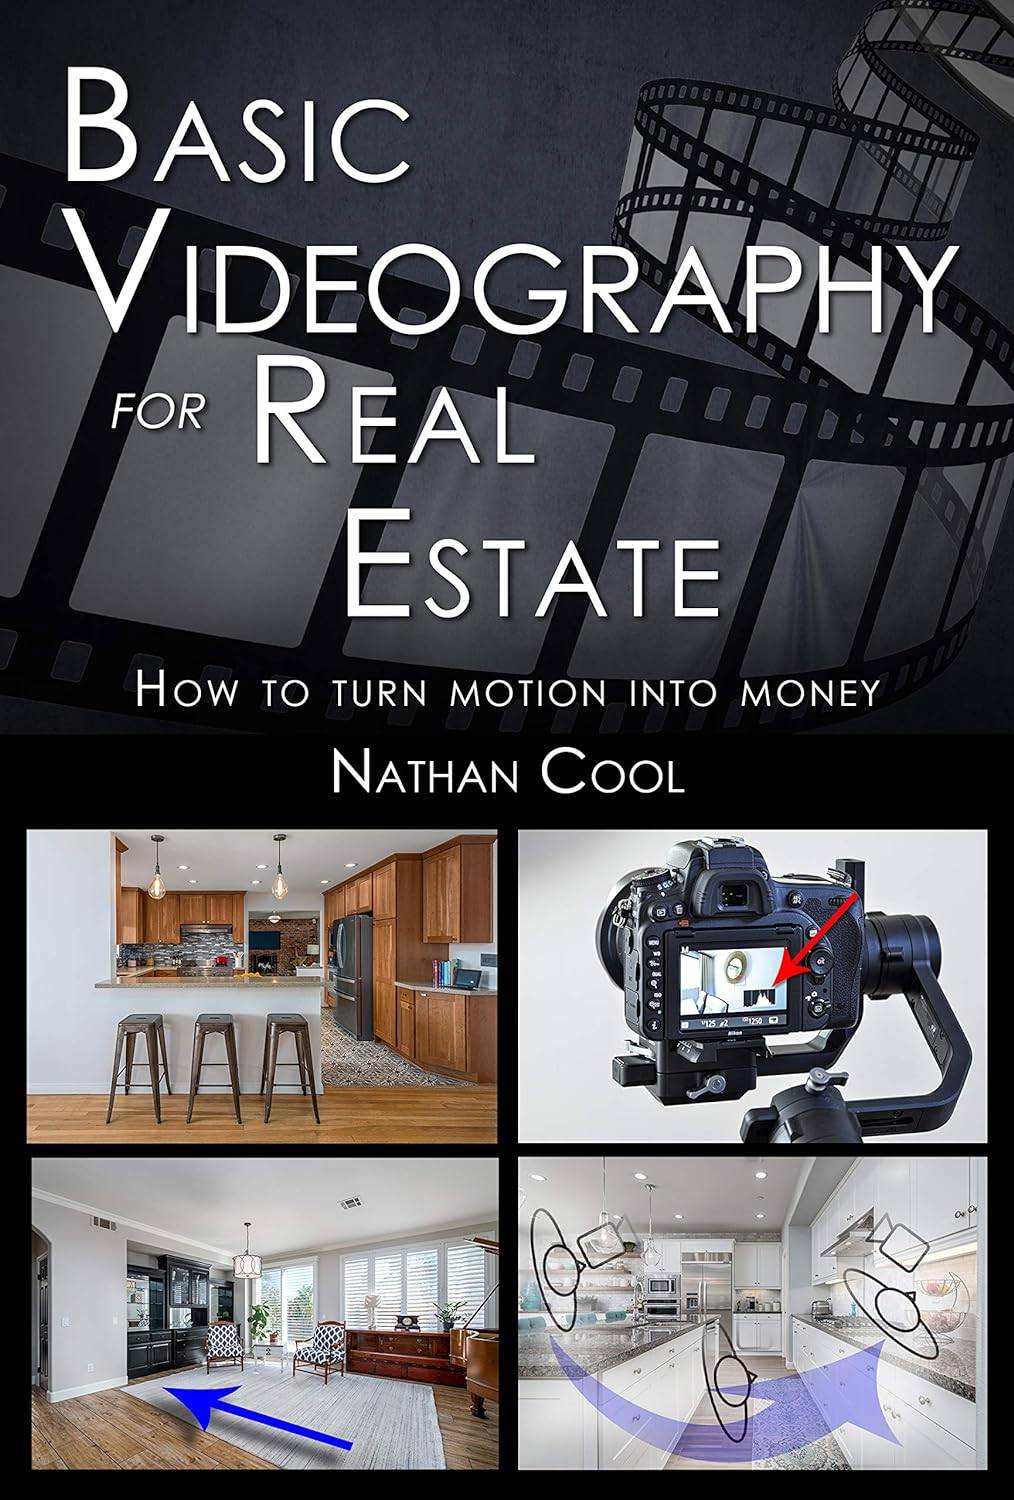 Basic Videography for Real Estate